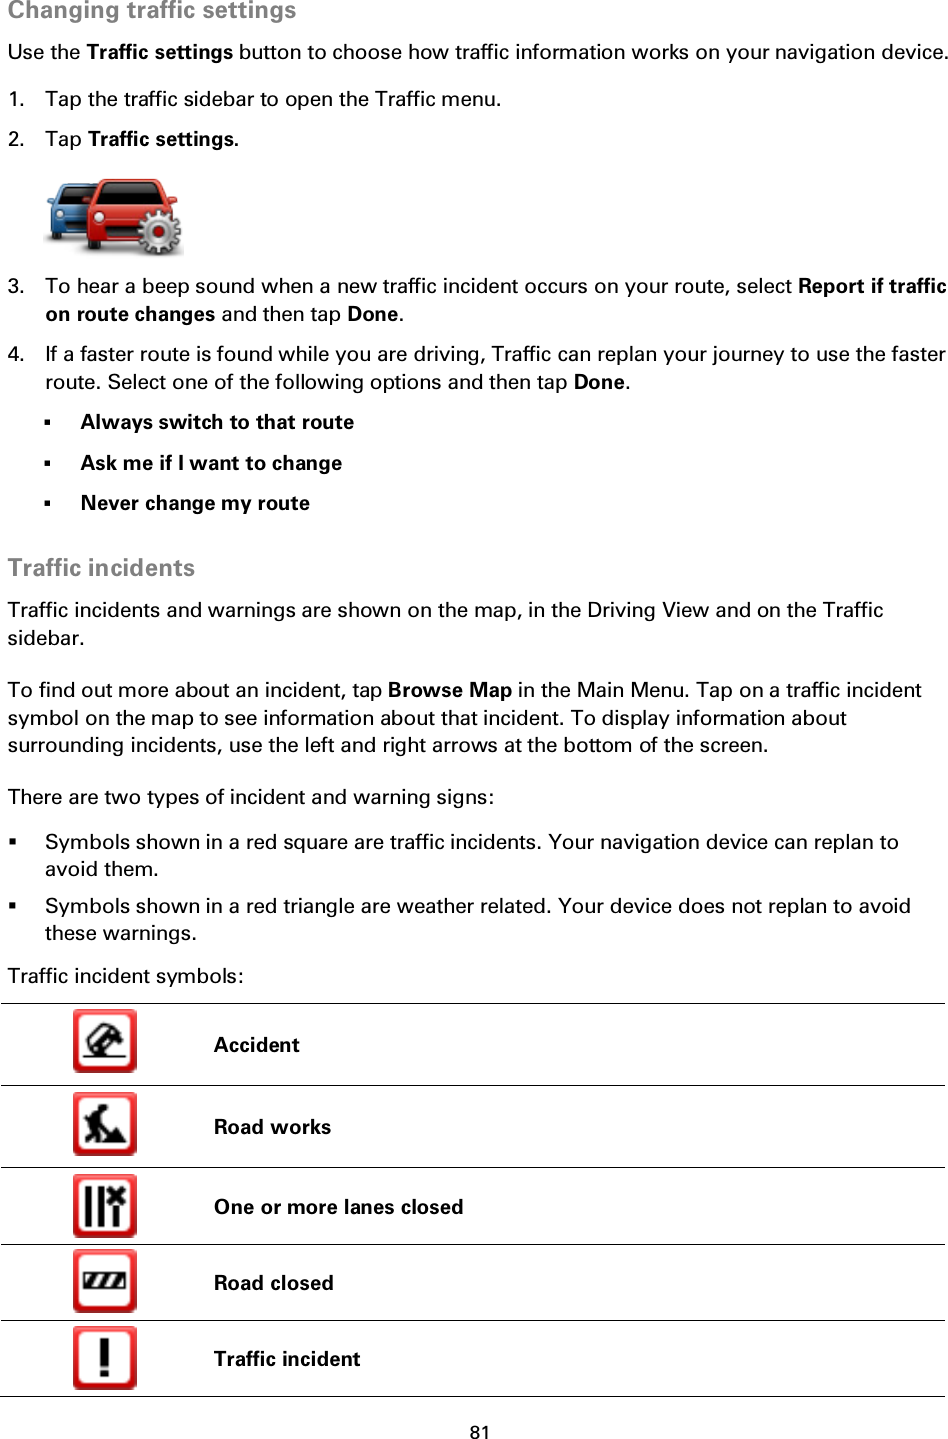 81    Changing traffic settings Use the Traffic settings button to choose how traffic information works on your navigation device. 1. Tap the traffic sidebar to open the Traffic menu. 2. Tap Traffic settings.  3. To hear a beep sound when a new traffic incident occurs on your route, select Report if traffic on route changes and then tap Done. 4. If a faster route is found while you are driving, Traffic can replan your journey to use the faster route. Select one of the following options and then tap Done.  Always switch to that route  Ask me if I want to change  Never change my route  Traffic incidents Traffic incidents and warnings are shown on the map, in the Driving View and on the Traffic sidebar. To find out more about an incident, tap Browse Map in the Main Menu. Tap on a traffic incident symbol on the map to see information about that incident. To display information about surrounding incidents, use the left and right arrows at the bottom of the screen. There are two types of incident and warning signs:  Symbols shown in a red square are traffic incidents. Your navigation device can replan to avoid them.  Symbols shown in a red triangle are weather related. Your device does not replan to avoid these warnings. Traffic incident symbols:  Accident  Road works  One or more lanes closed  Road closed  Traffic incident 